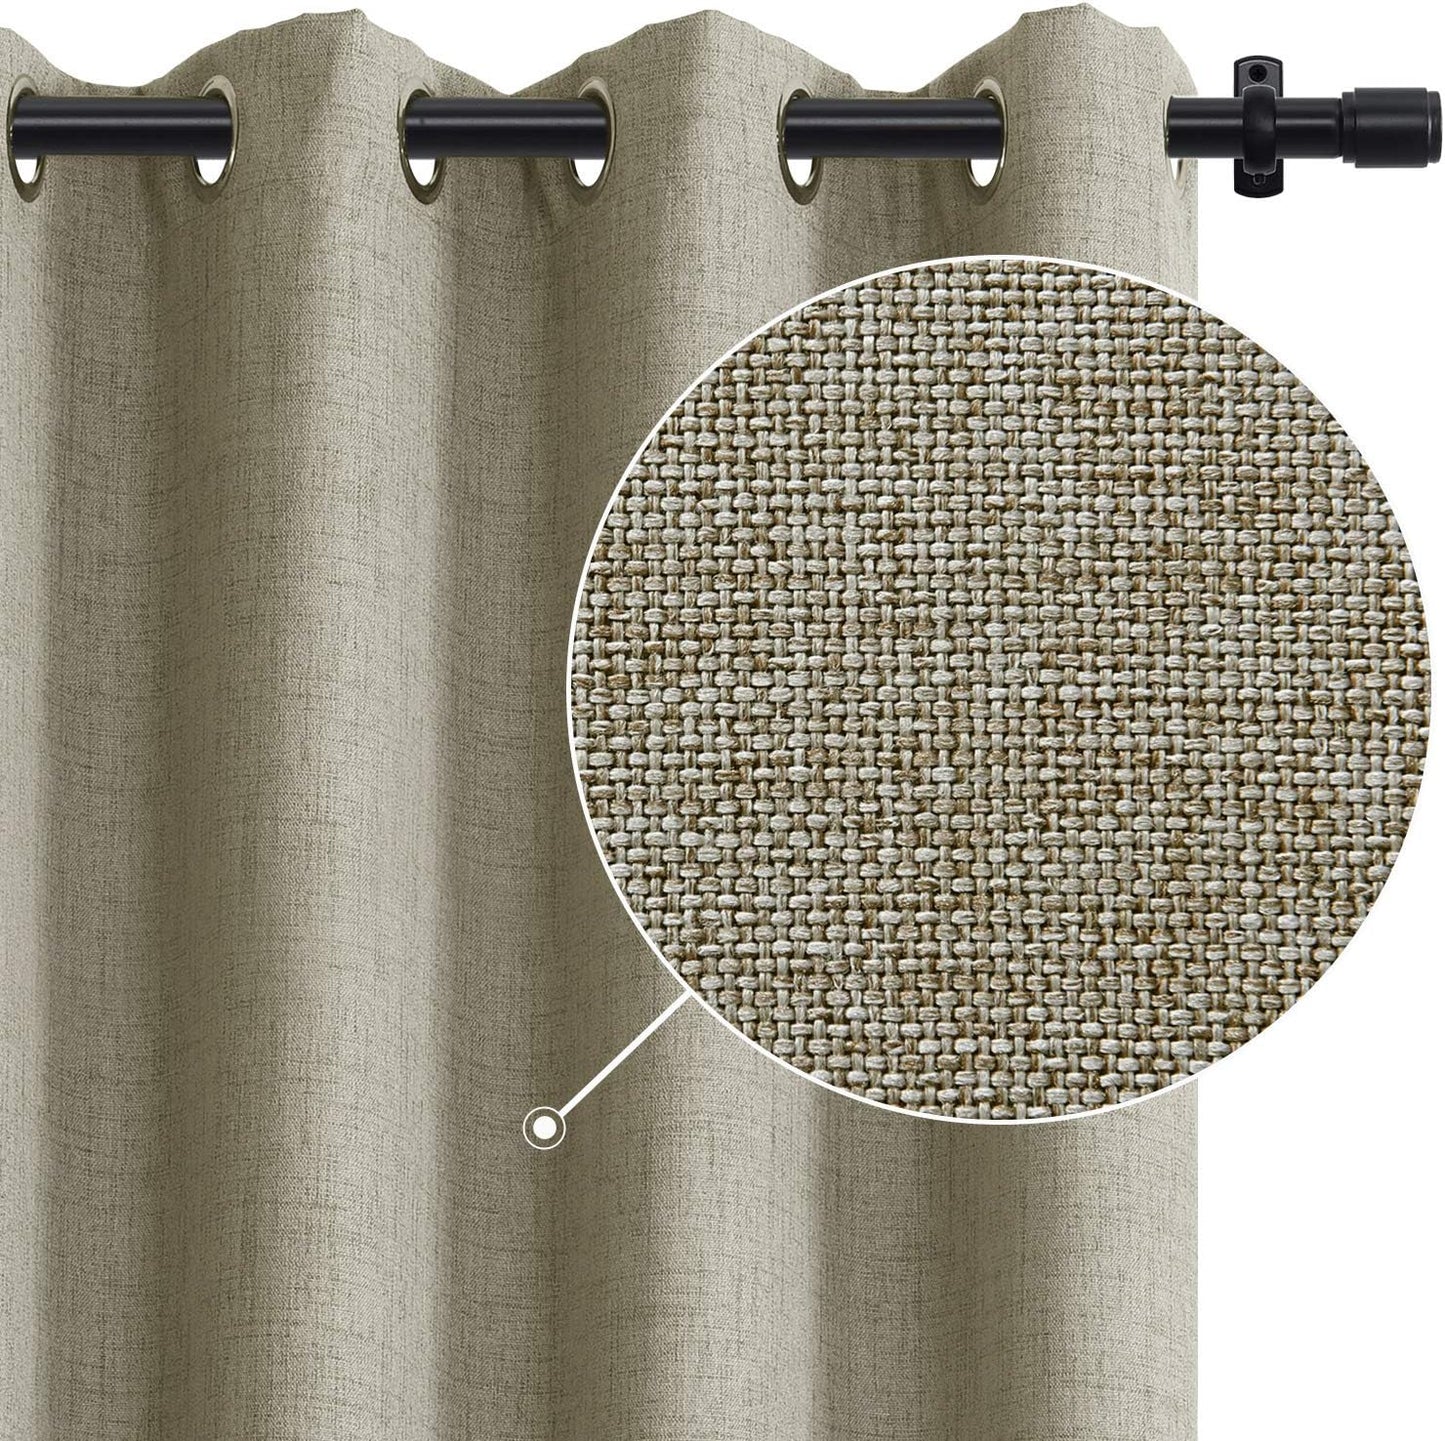 Rose Home Fashion Sliding Door Curtains, Primitive Linen Look 100% Blackout Curtains, Thermal Insulated Patio Door Curtains-1 Panel (W100 X L84, Grey)  Rose Home Fashion Natural W50 X L63|1 Panel 